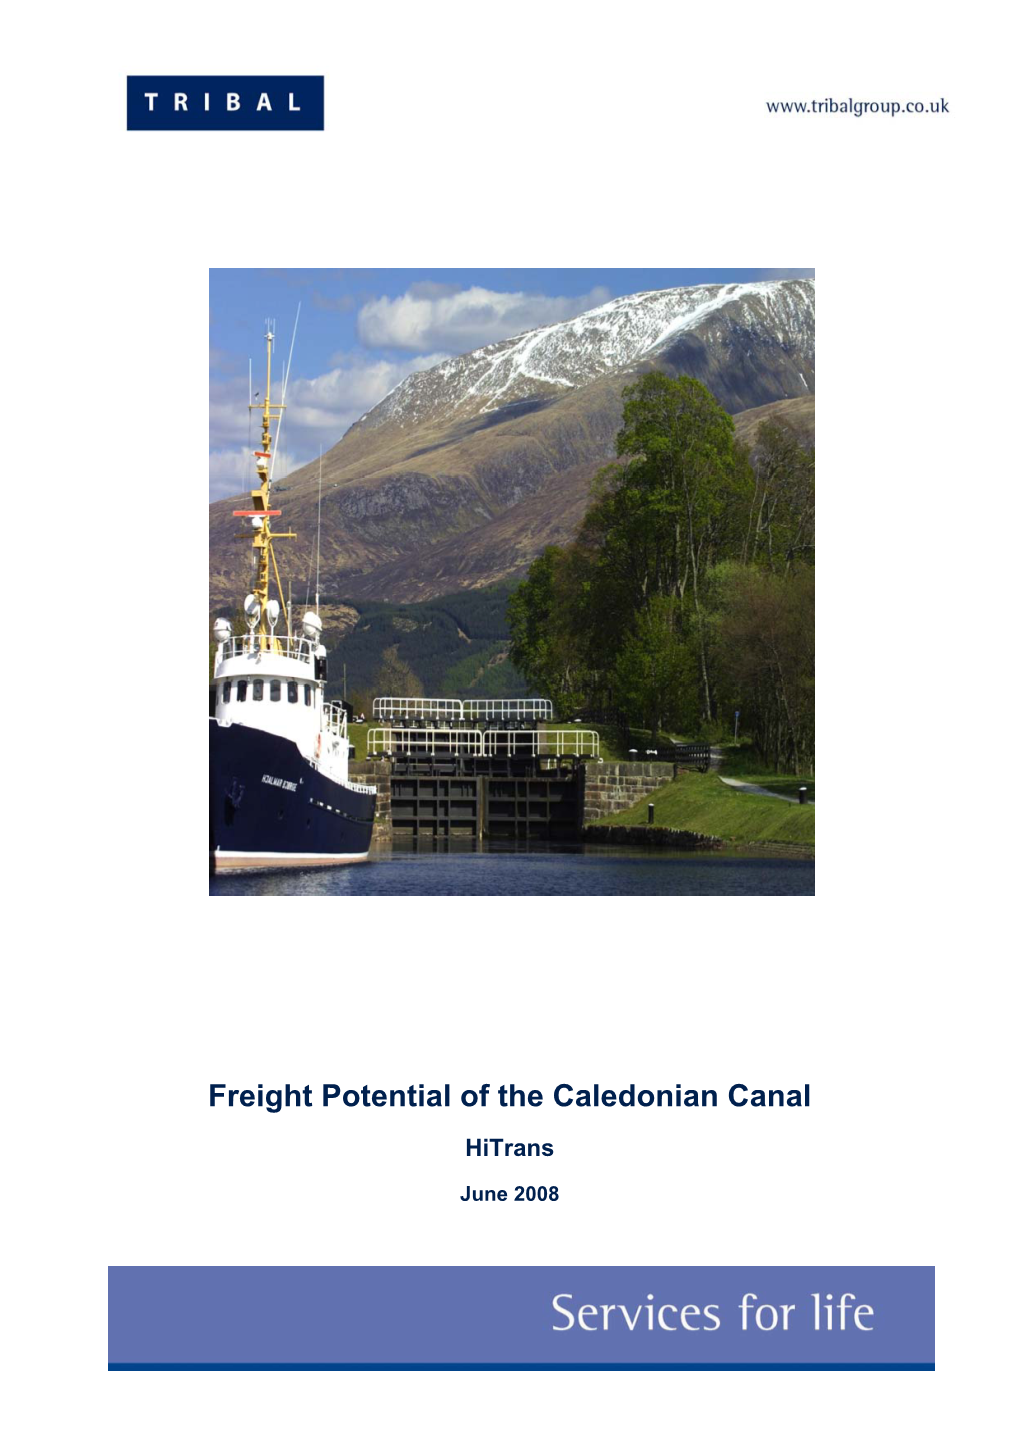 Freight Potential of the Caledonian Canal